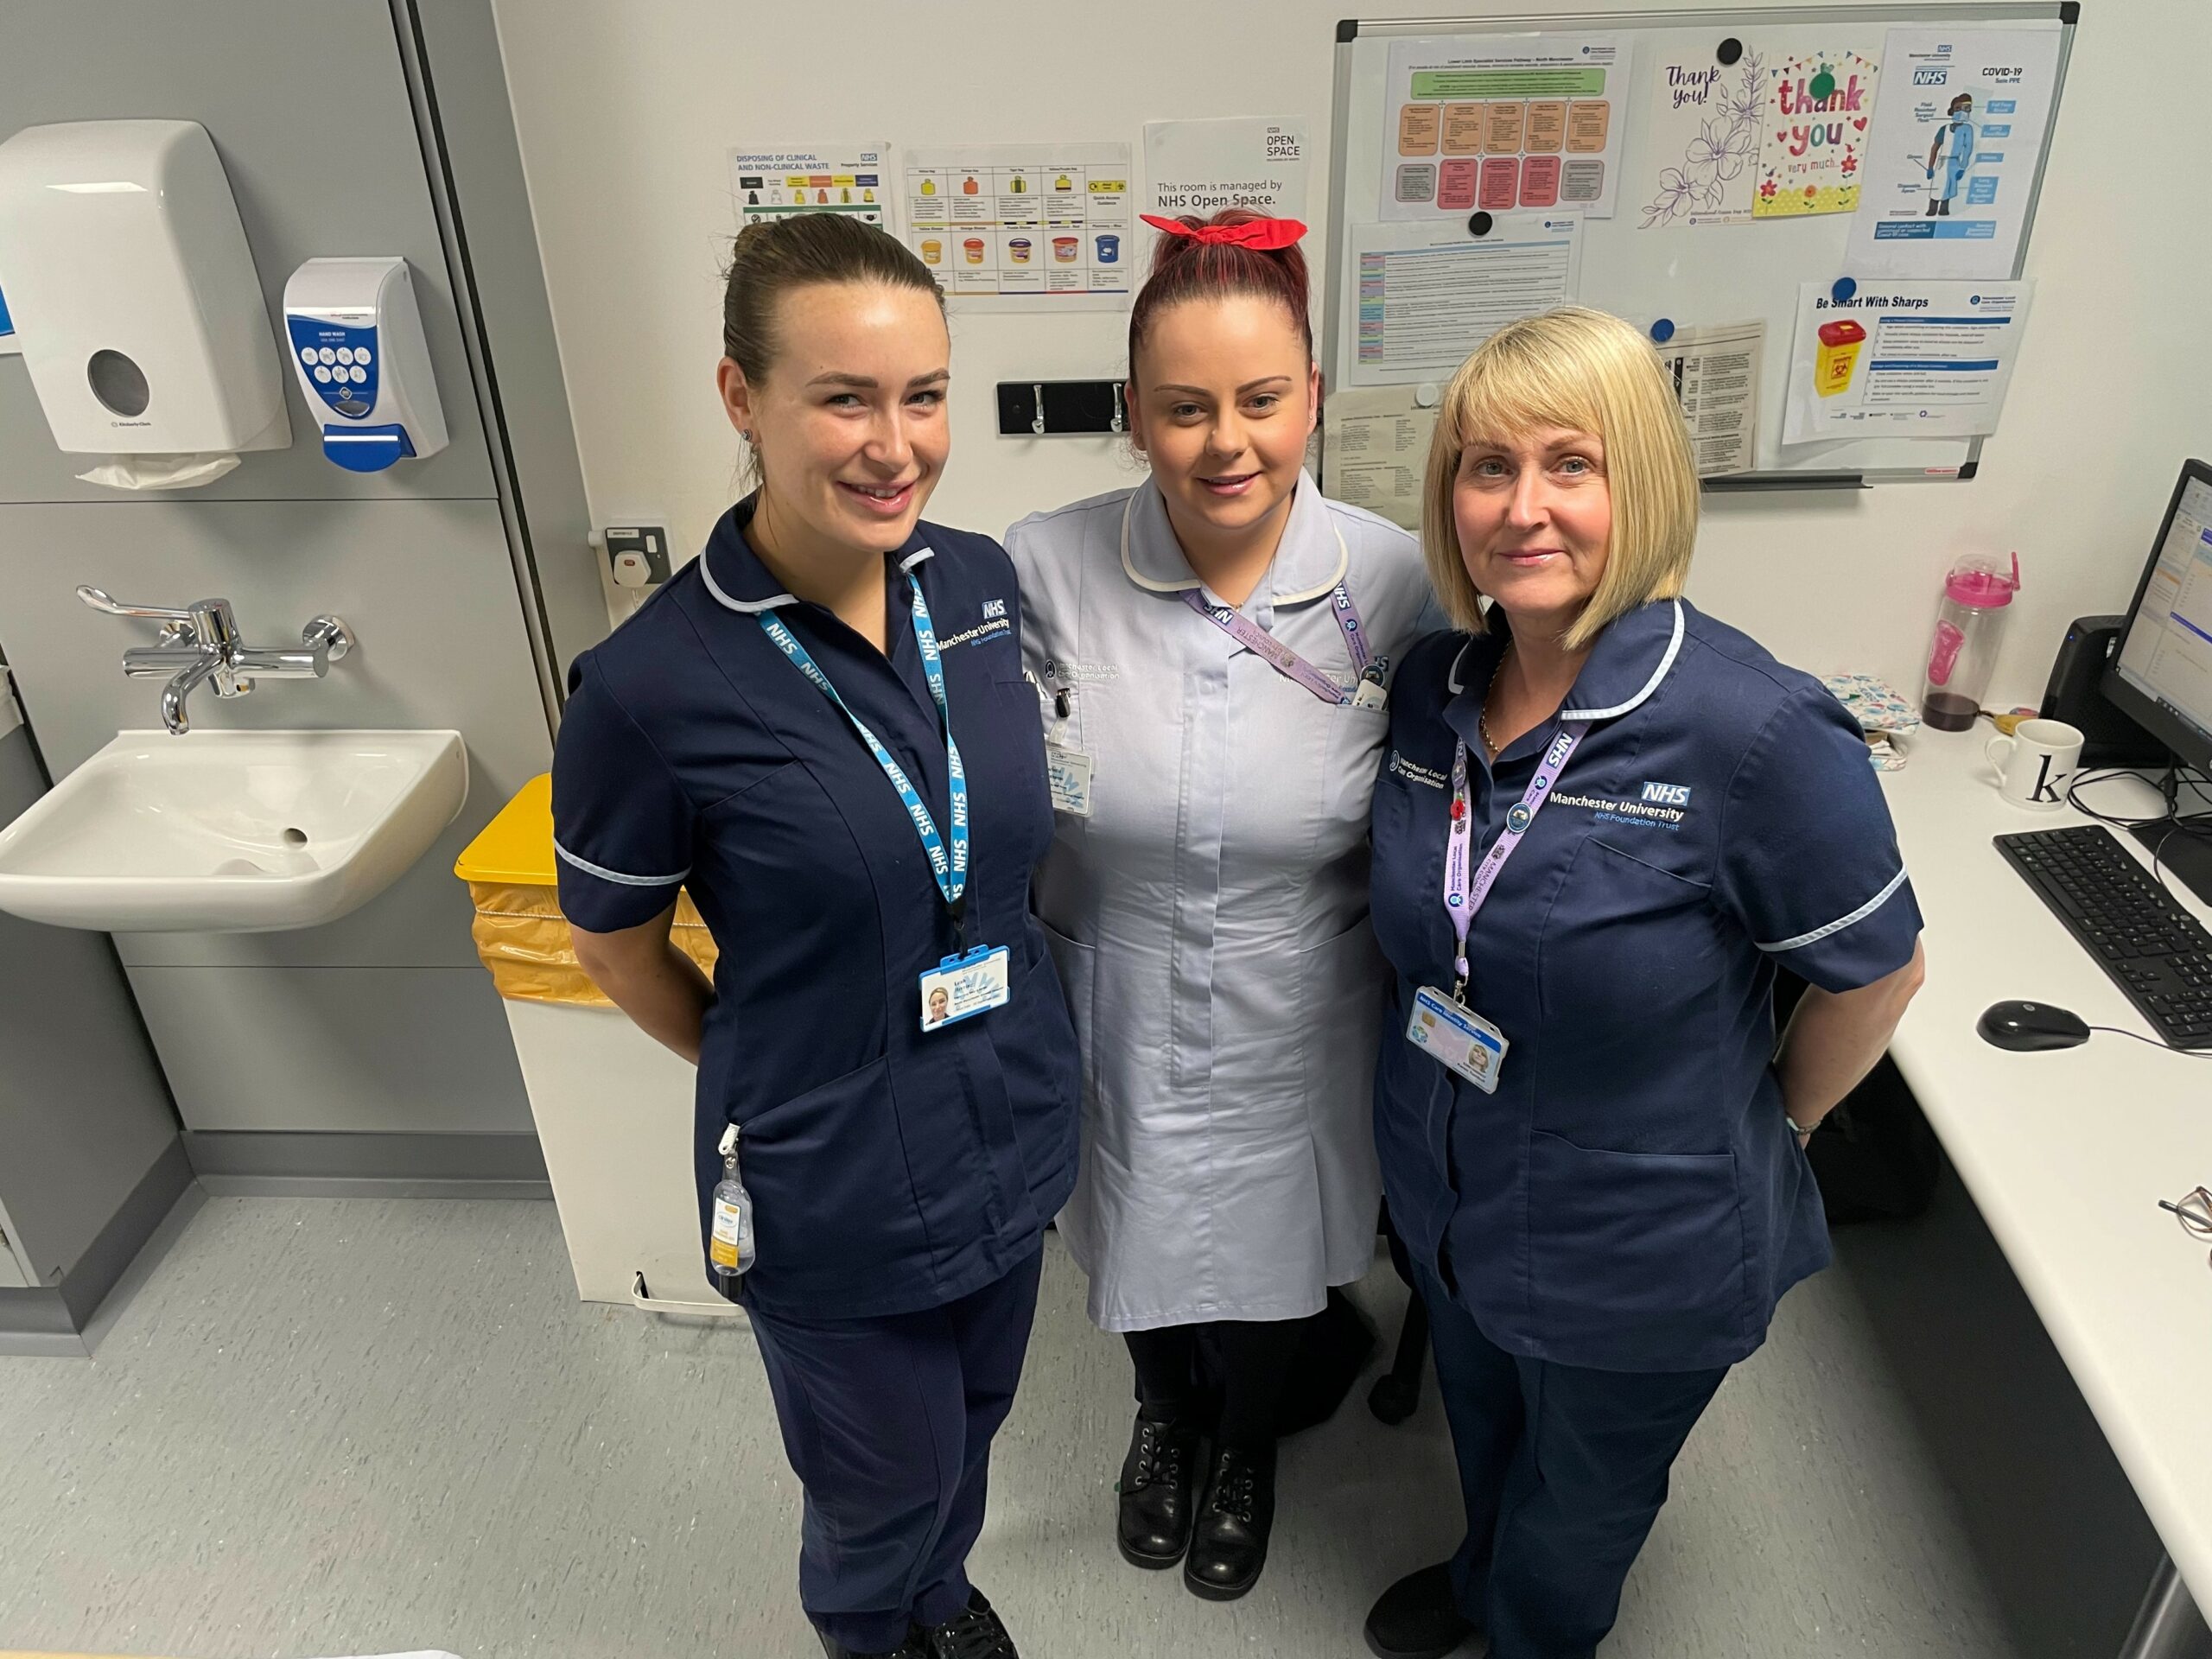 Pictured are: Karen Turnbull - Team Leader, Leg Ulcer/ Treatment Room Services Leah Herring - Sister, Leg Ulcer and Homeless Wound Care Service Nurse (also provides domiciliary visits to housebound people) Charlotte Wainhouse - Staff Nurse, Leg Ulcer/Homeless Nurse